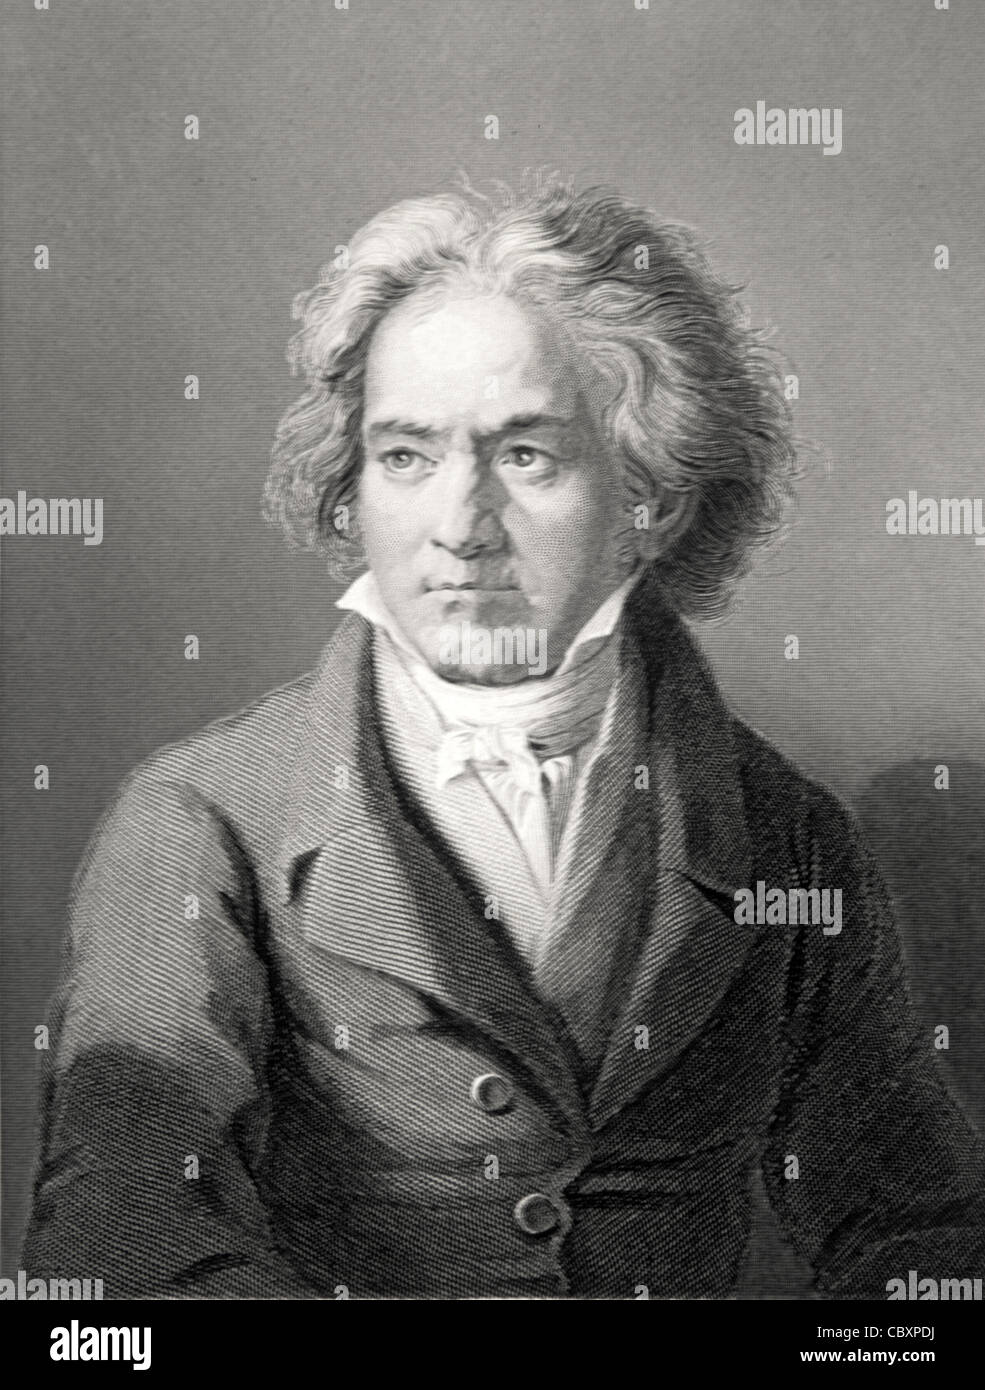 Portrait of Ludwig van Beethoven (1770-1827) German Composer. c19th Engraving by W. Holl from Painting by Kloeber. Vintage Illustration Stock Photo